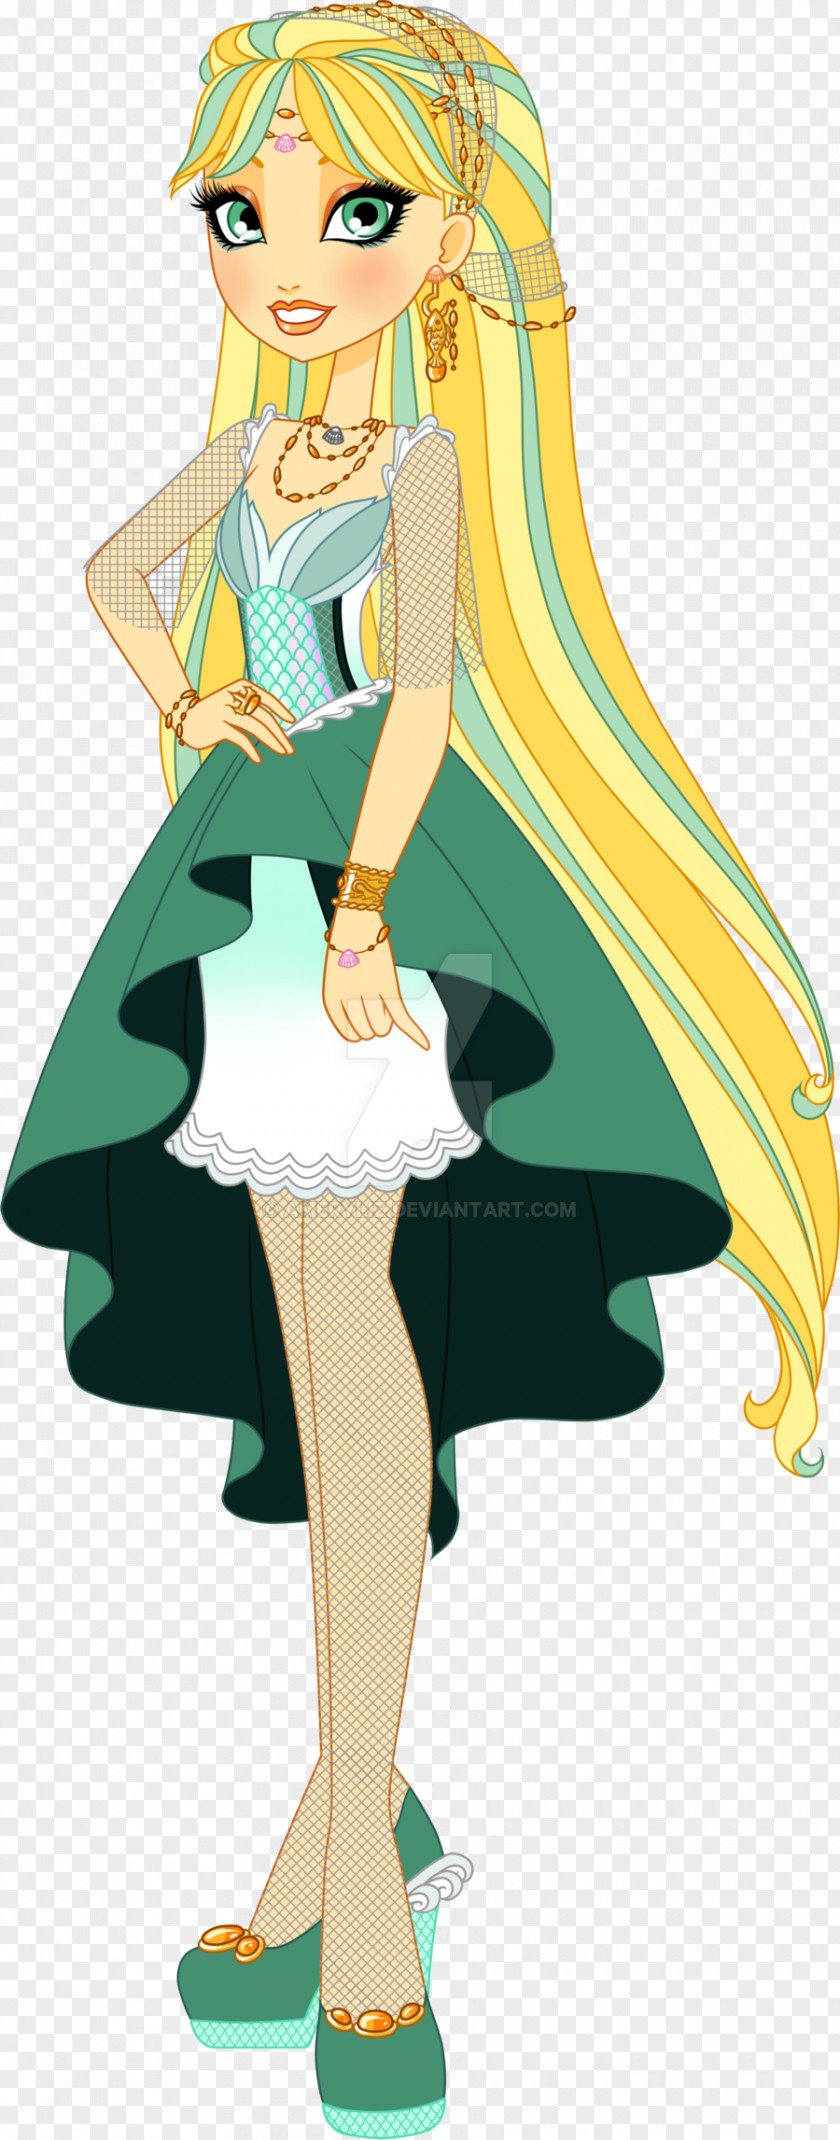 Jade Hare Ever After High Art The Snow Queen Fairy Tale PNG